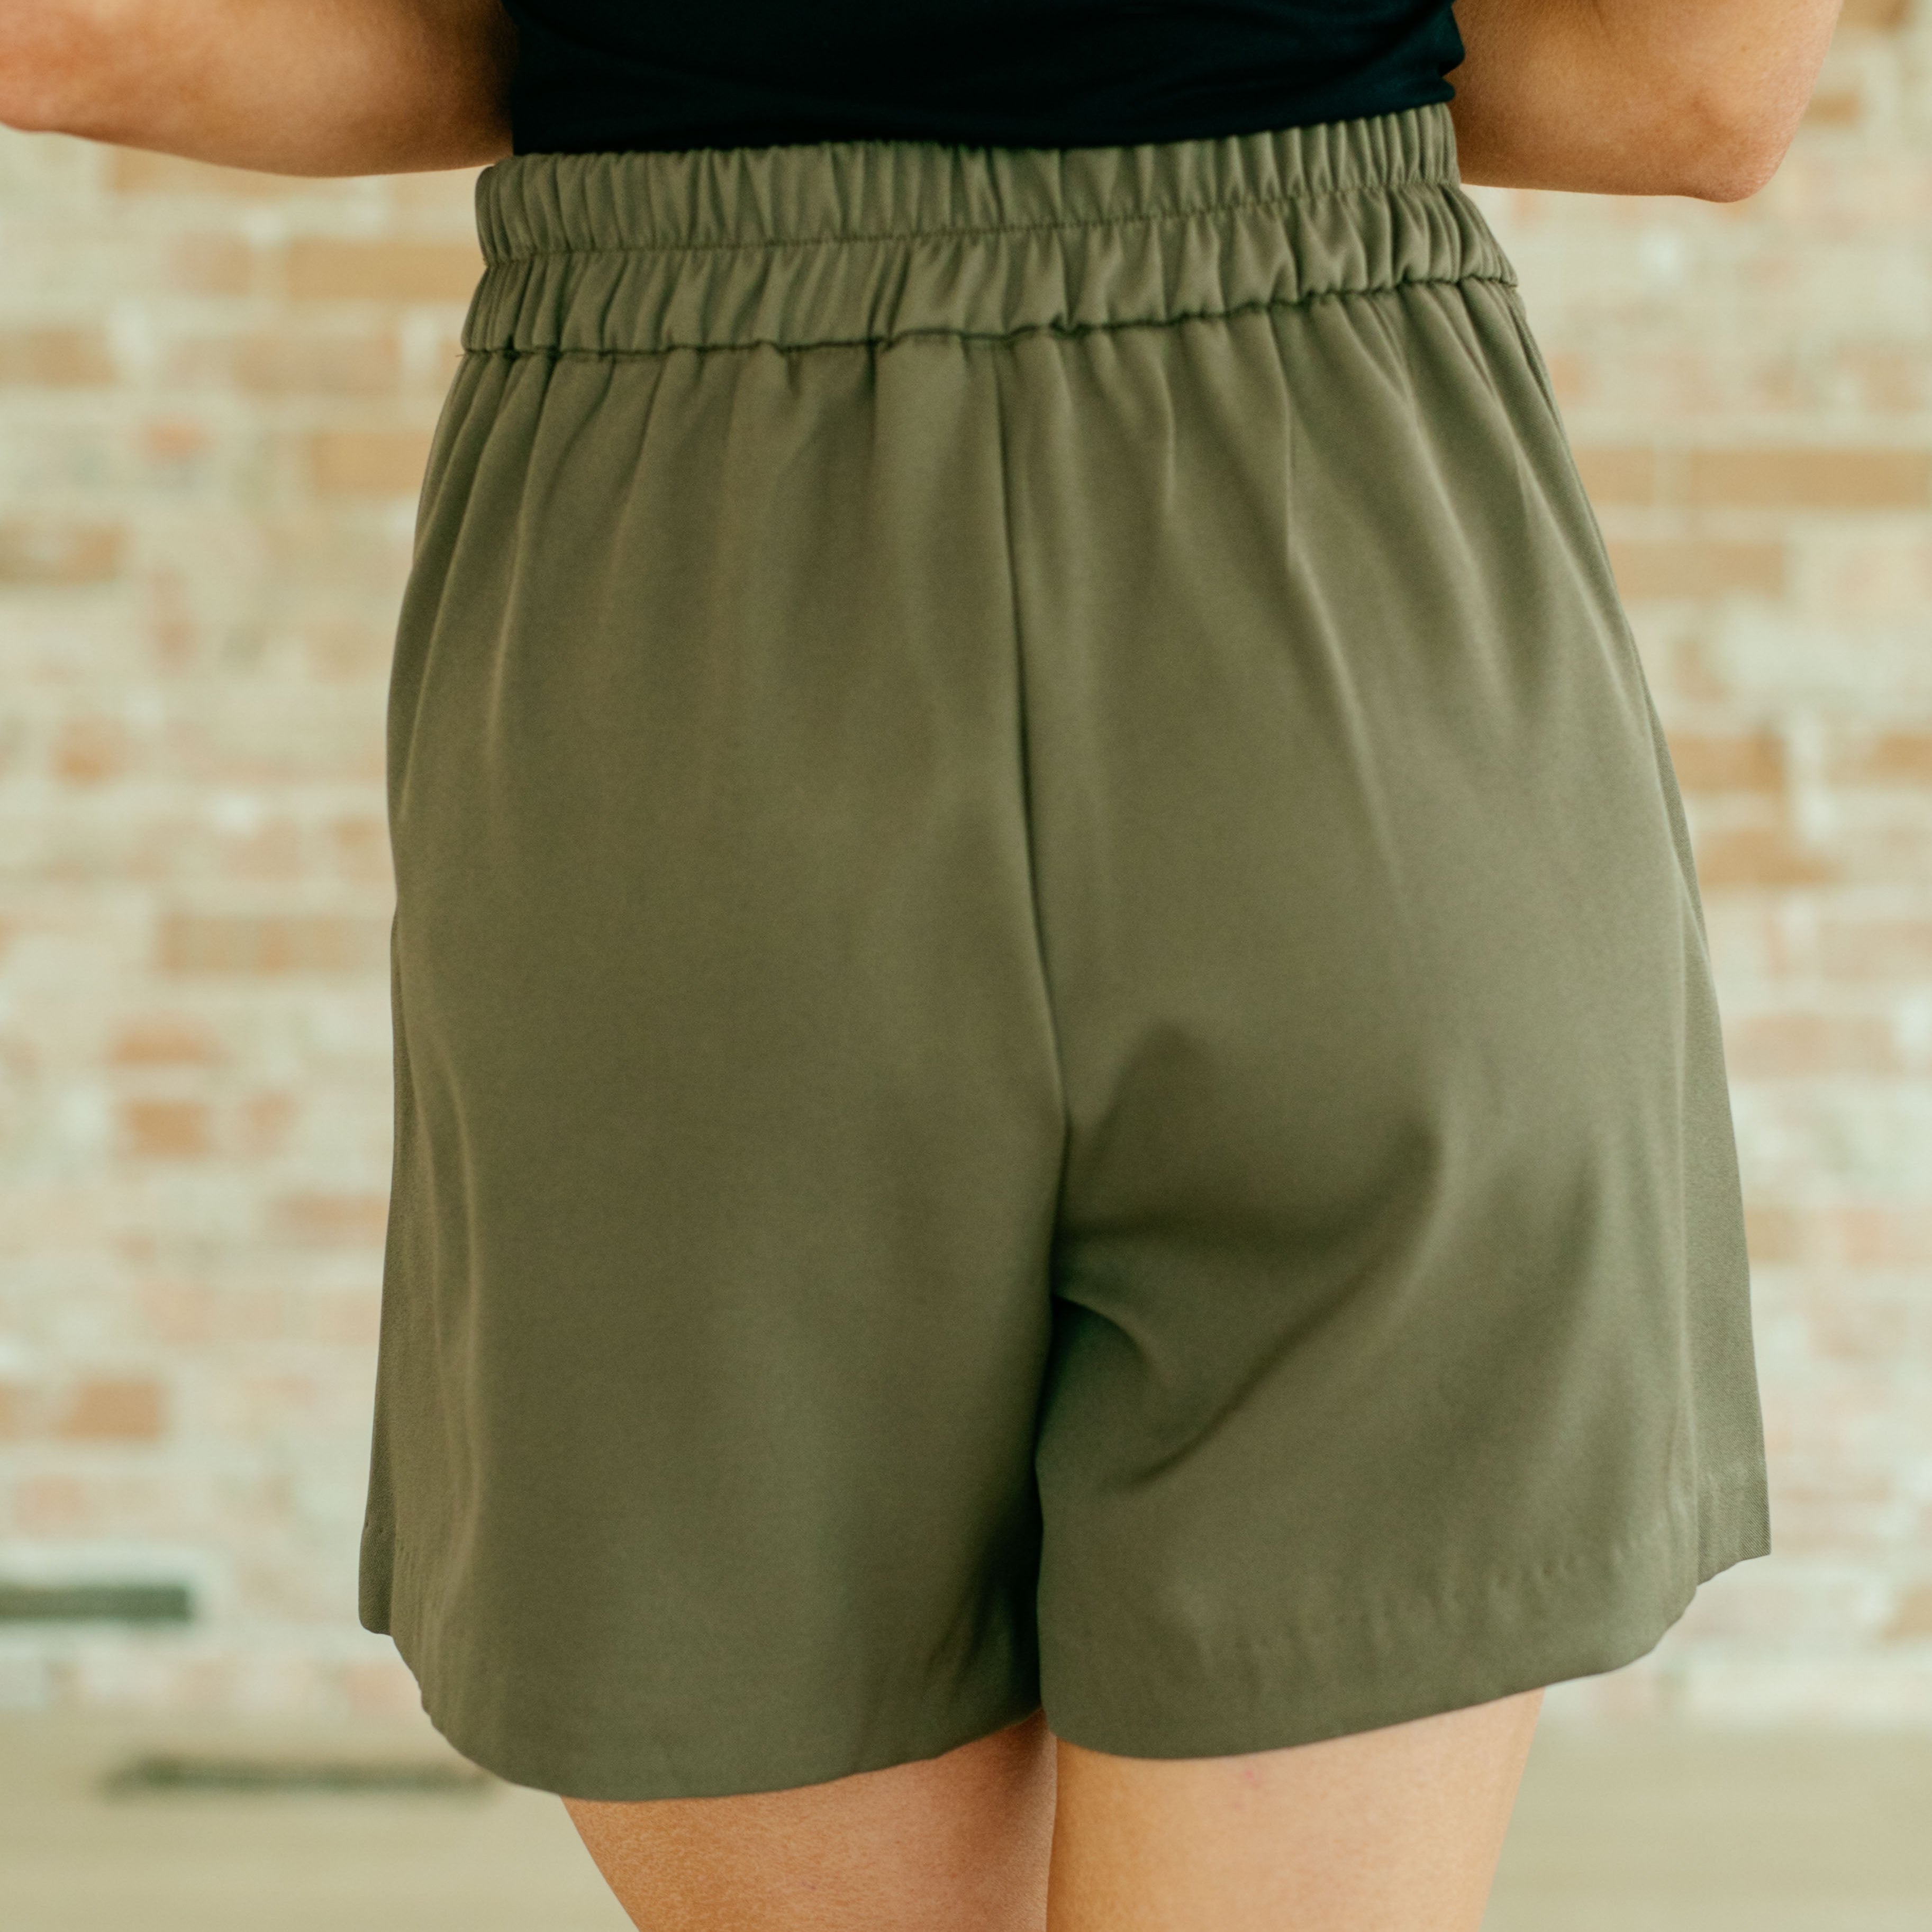 All Your Friends Skort